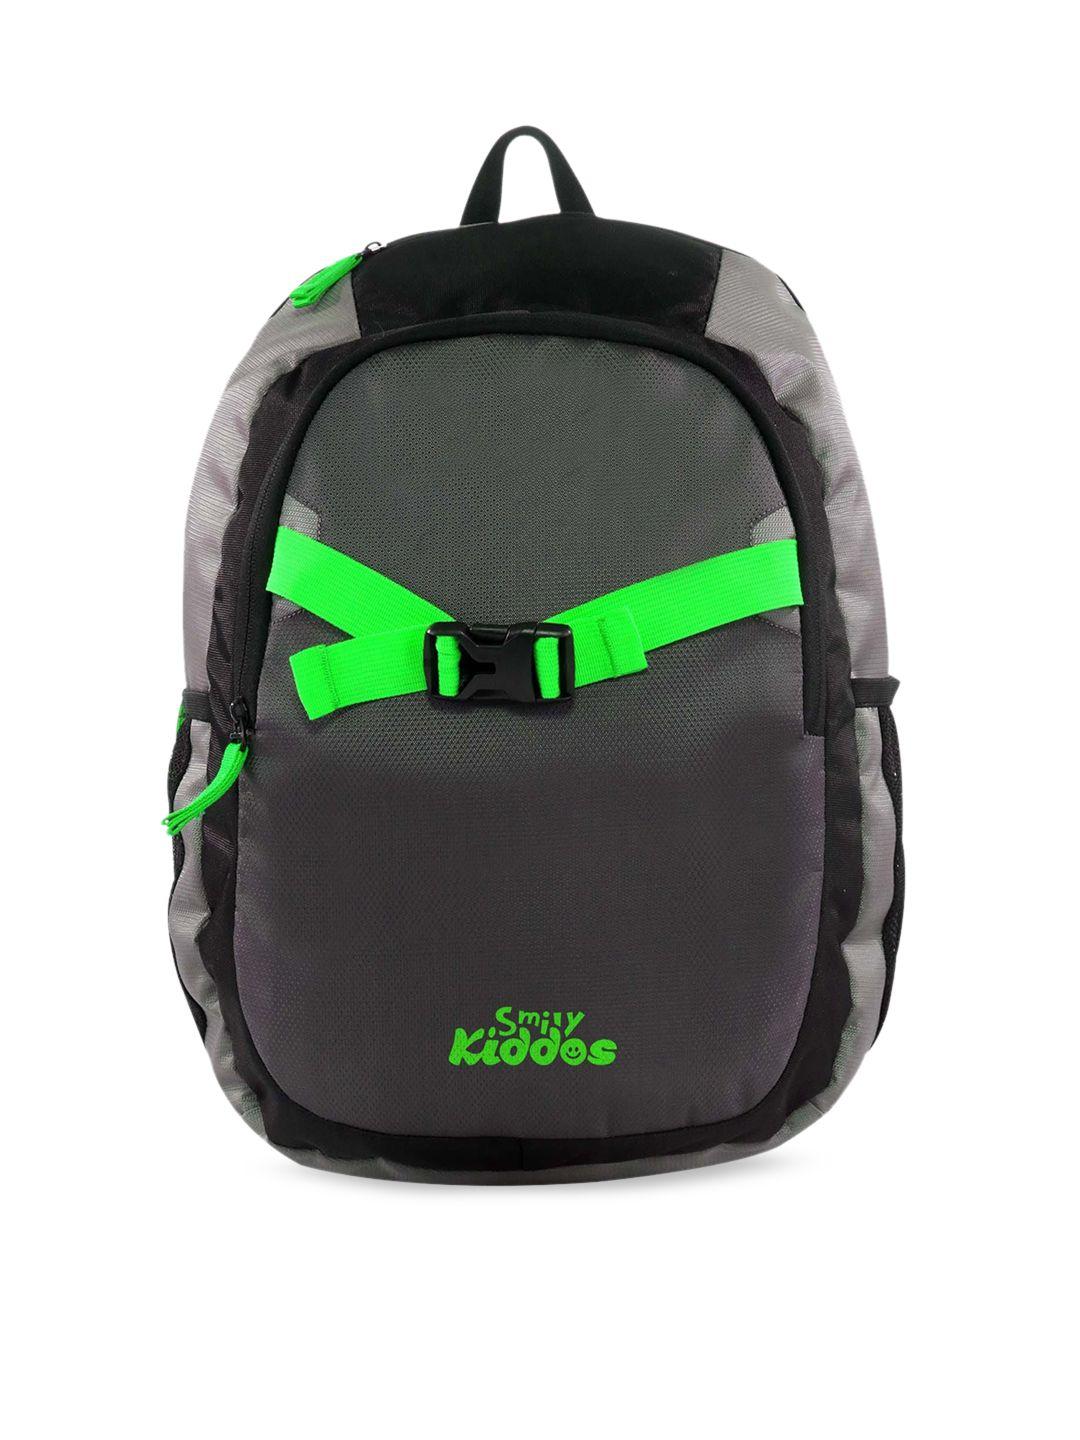 smily kiddos unisex kids green & grey brand logo backpack with compression straps